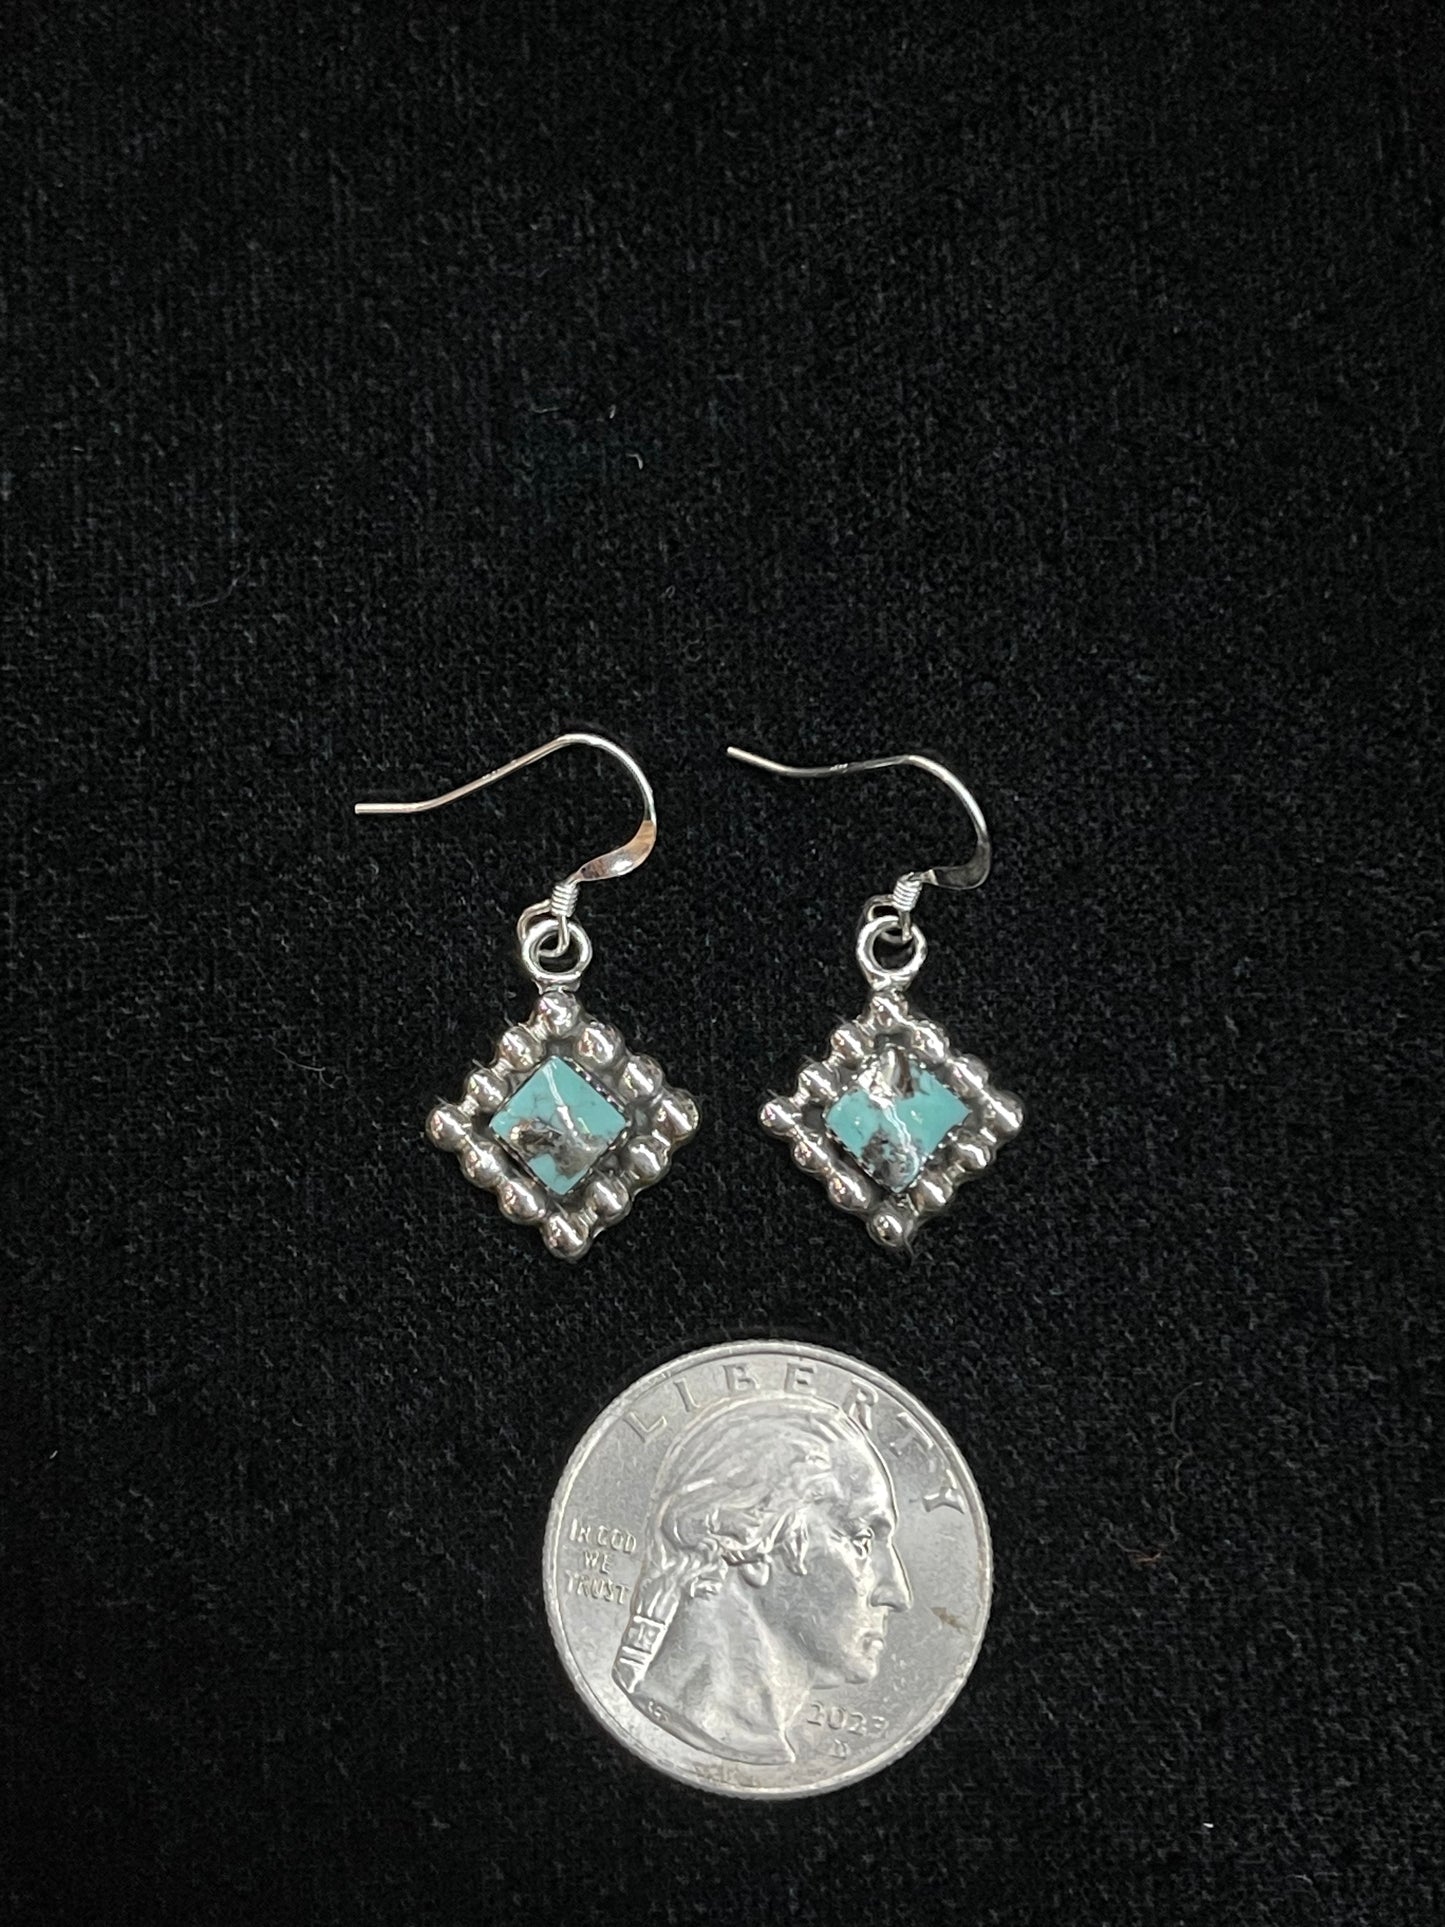 Turquoise Dangle Earrings by Mike Smith, Navajo